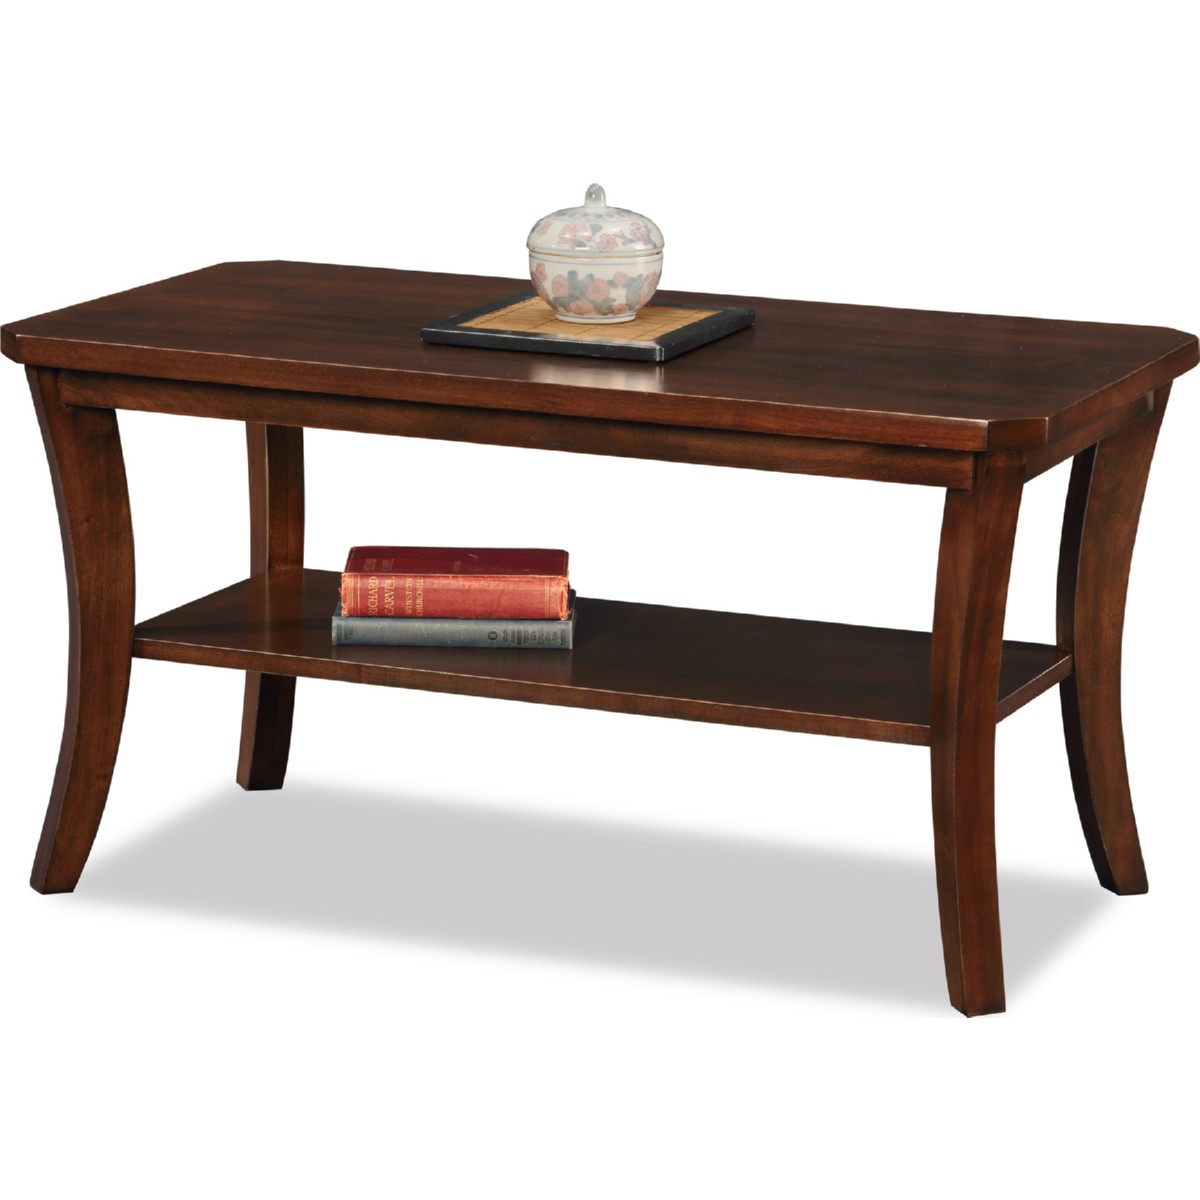 Leick 10303 Condo Apartment Coffee Table In Chocolate Cherry Finish